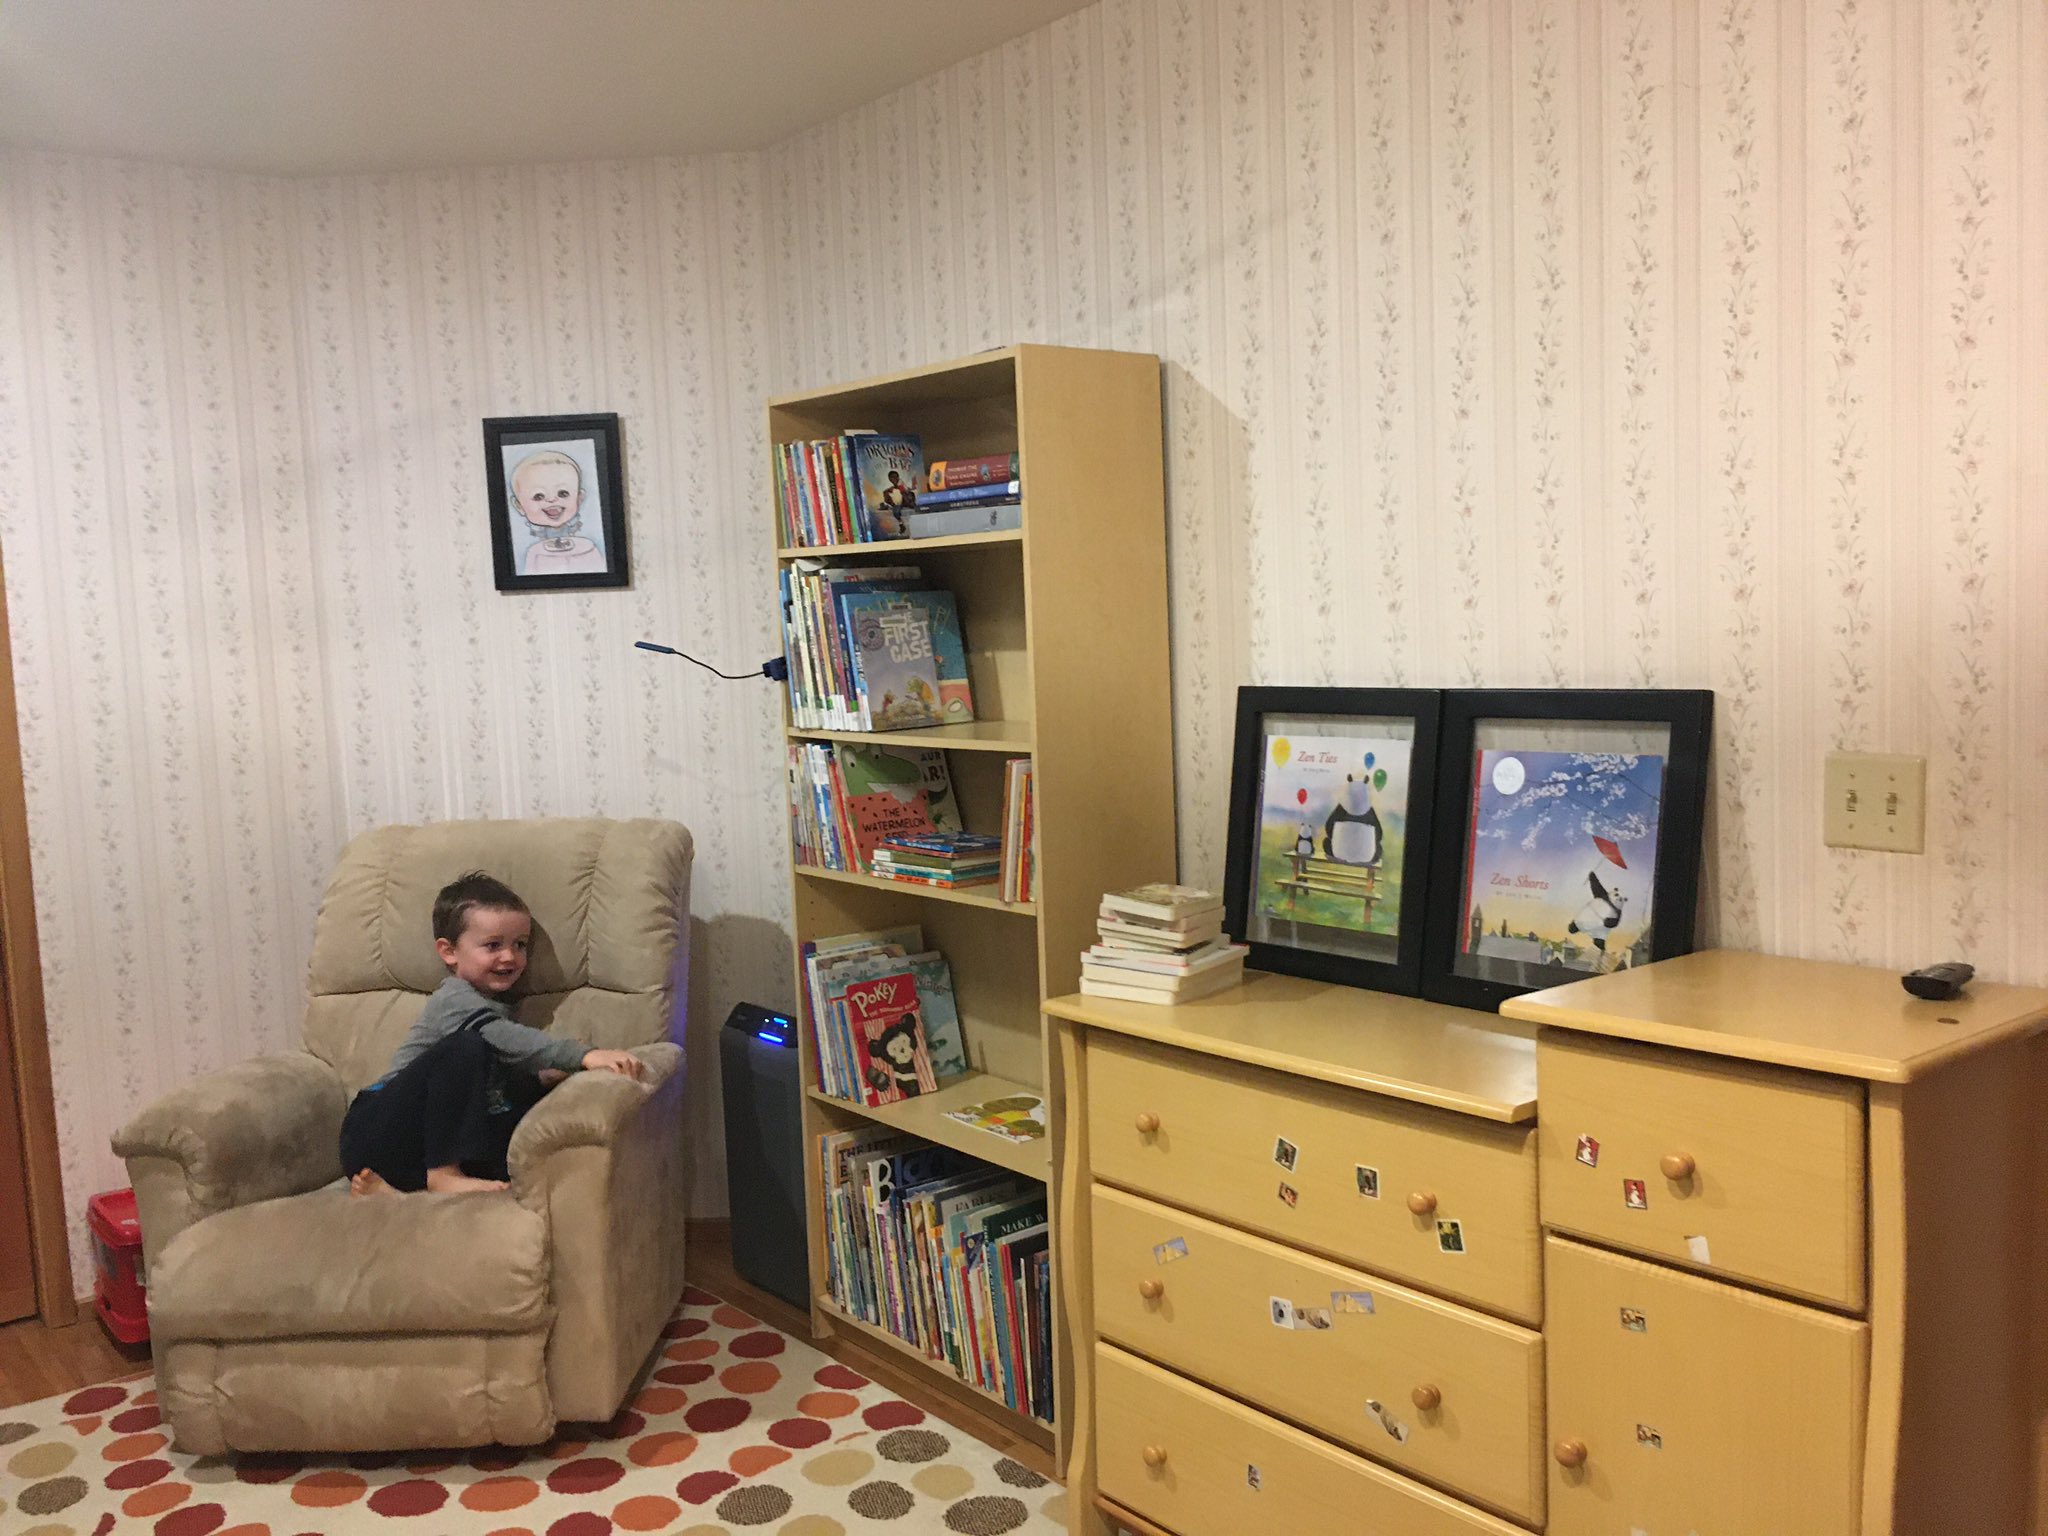 Julian's bedroom. Julian is sitting in a rocking chair. To his right is a bookcase with books and to the right of that is his dresser. Above the rocking chair is a caricature of Julian. The rug on the floor has multi-colored polka dots.